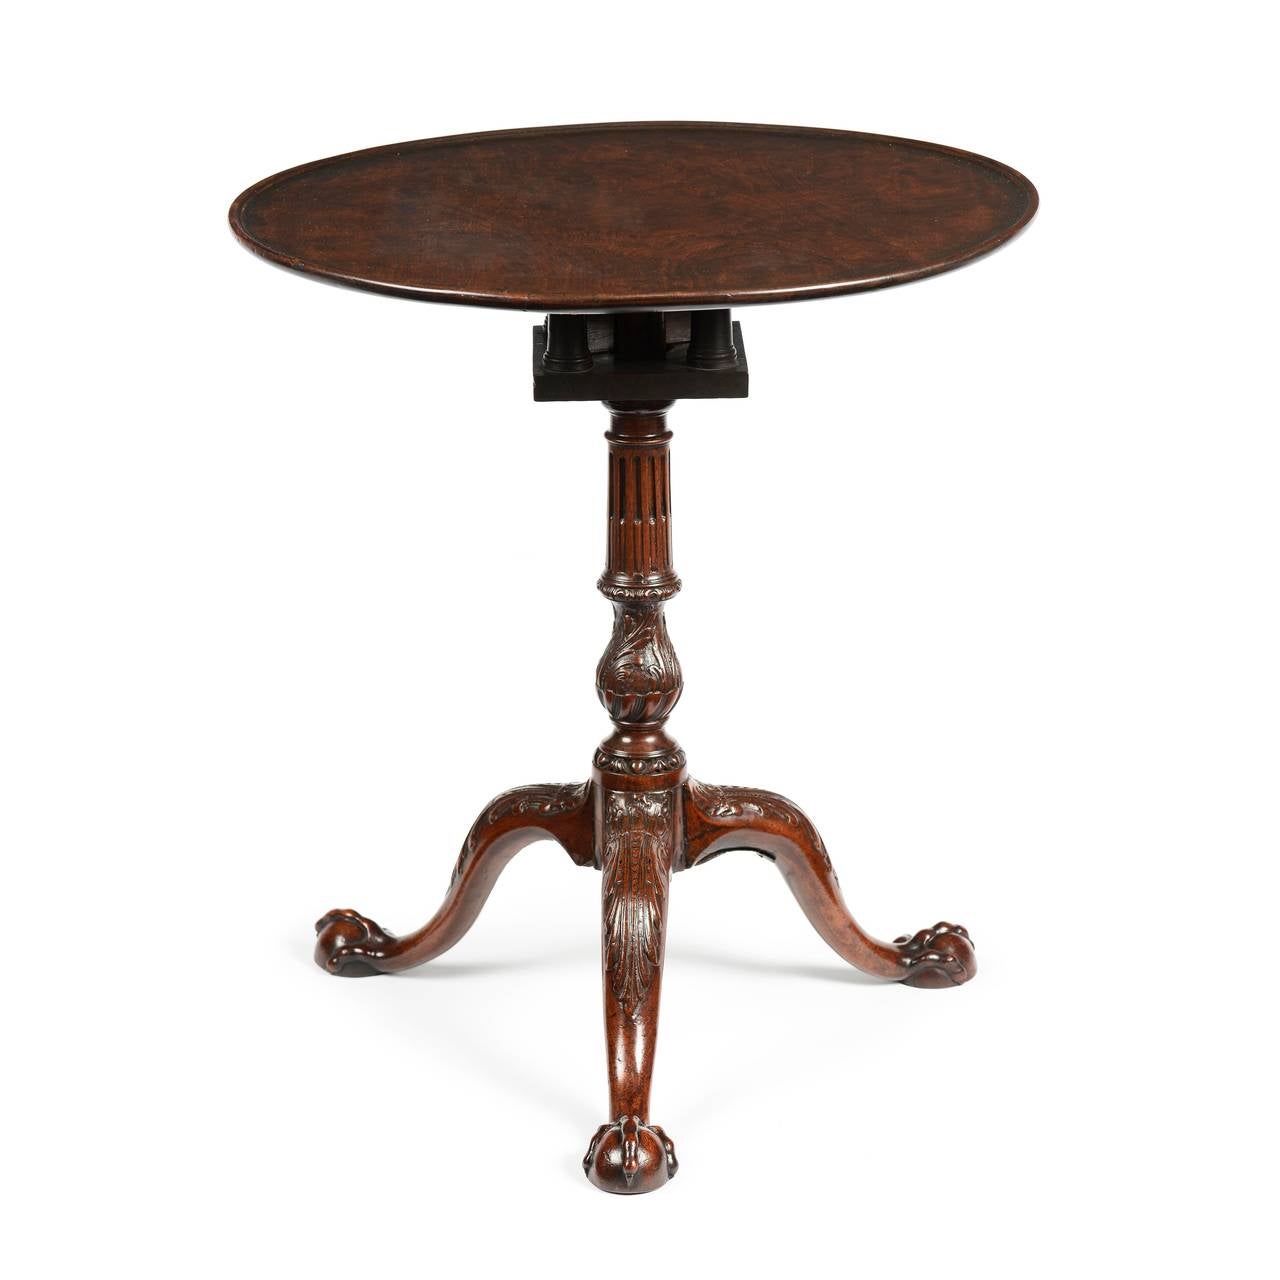 A superb George II carved mahogany tripod table retaining excellent original colour and patina. Thee extremely well figured top with a dished edge, supported by a revolving birdcage action. The column of tapering form, stop fluted to the top, with